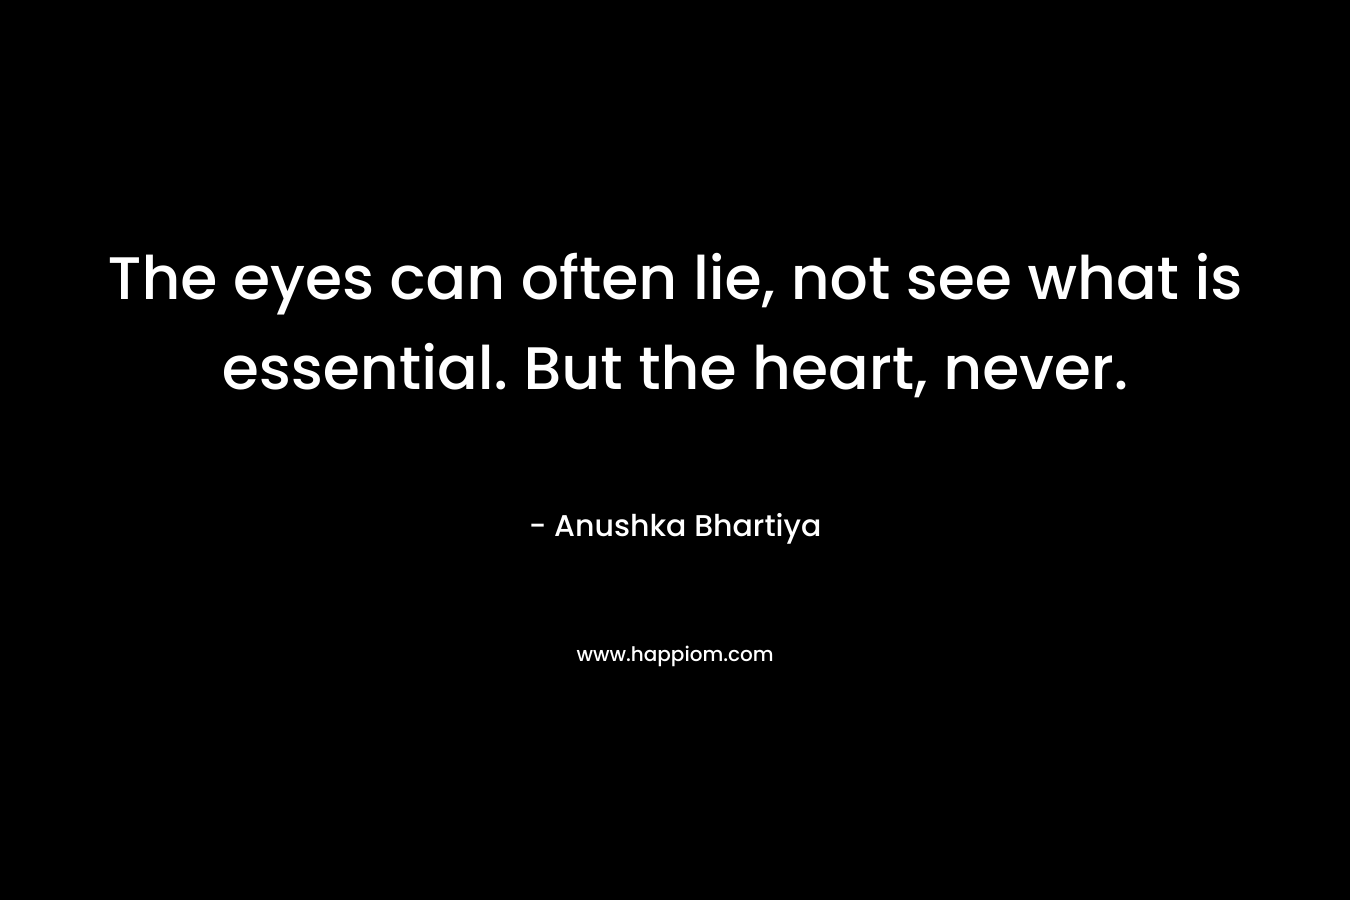 The eyes can often lie, not see what is essential. But the heart, never. – Anushka Bhartiya